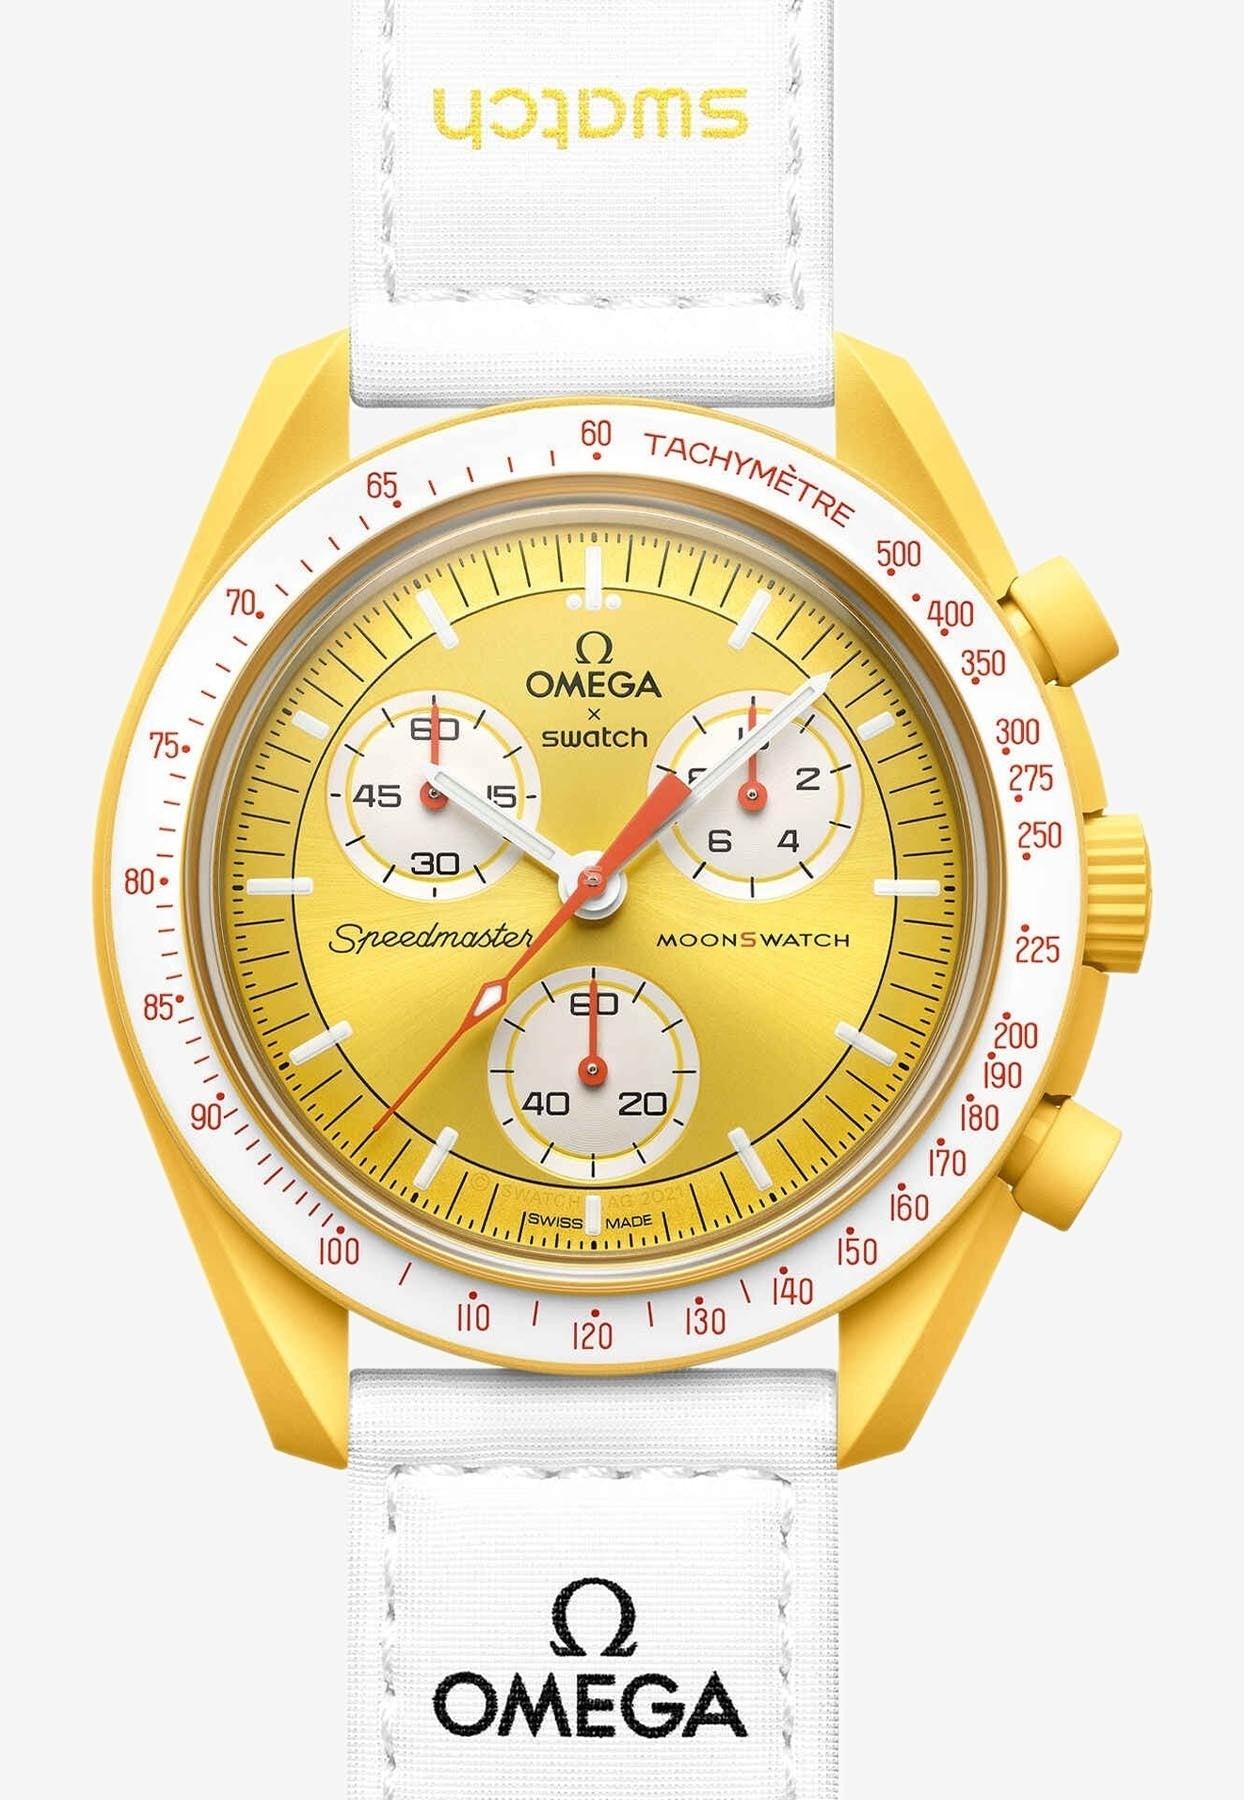 Omega swatch mission to the sun-